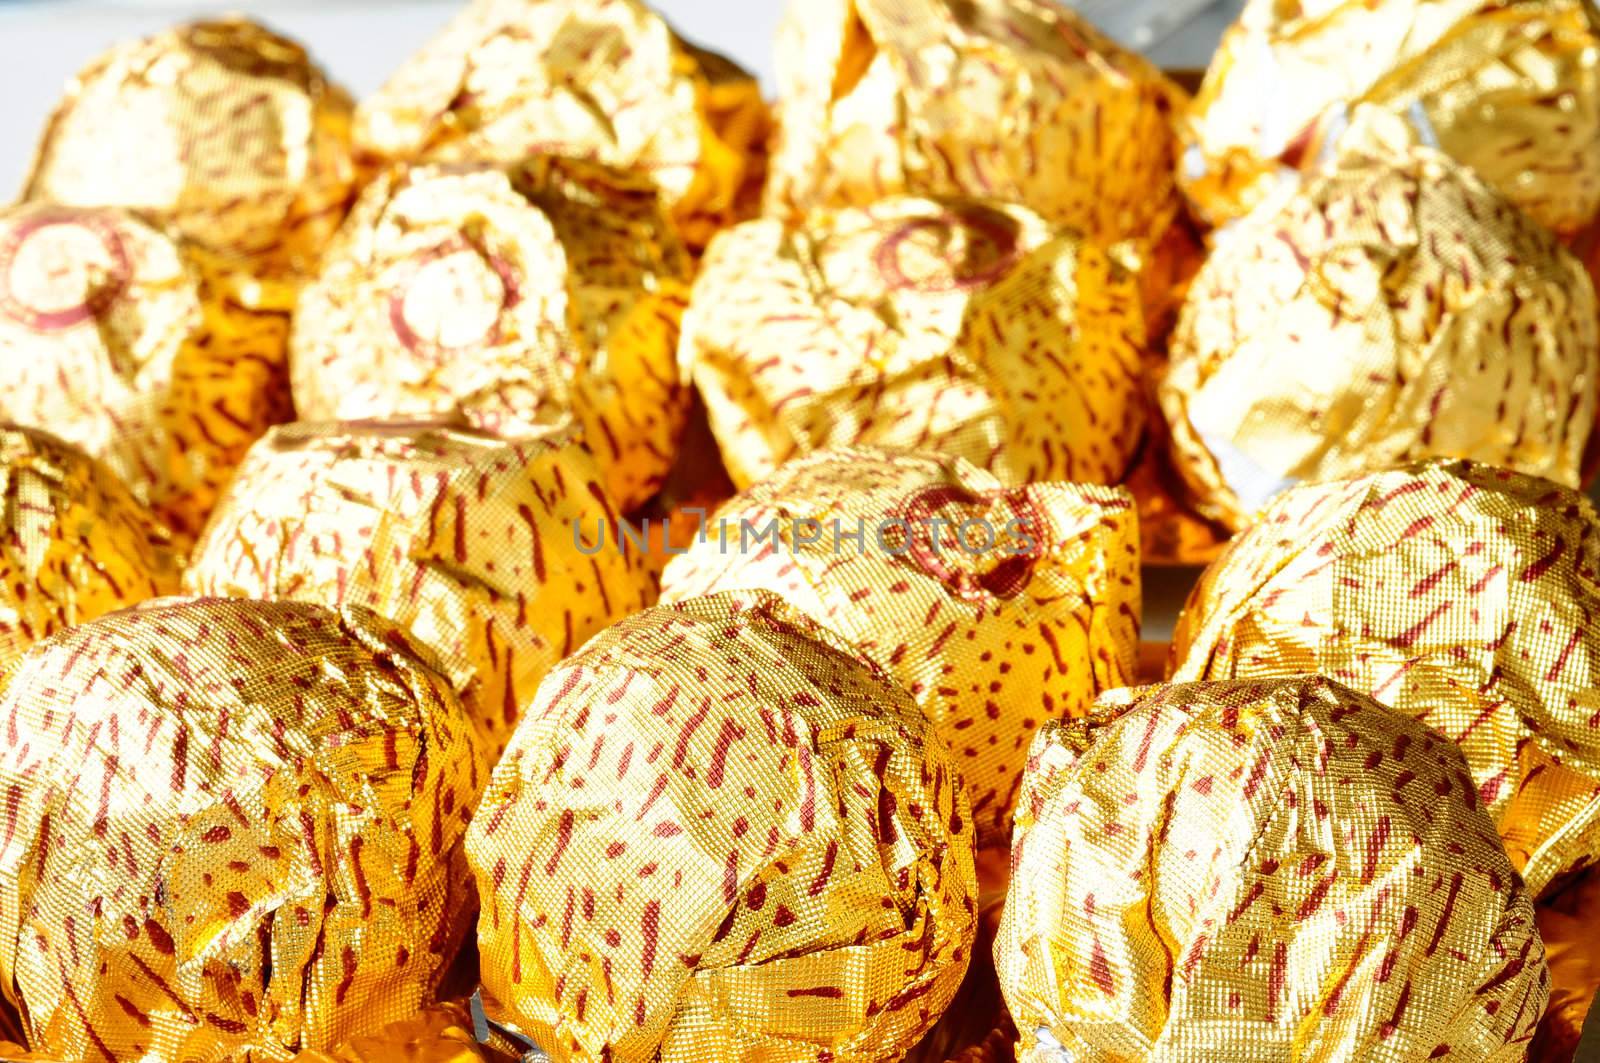 Chocolate wrapped in golden paper by bbbar